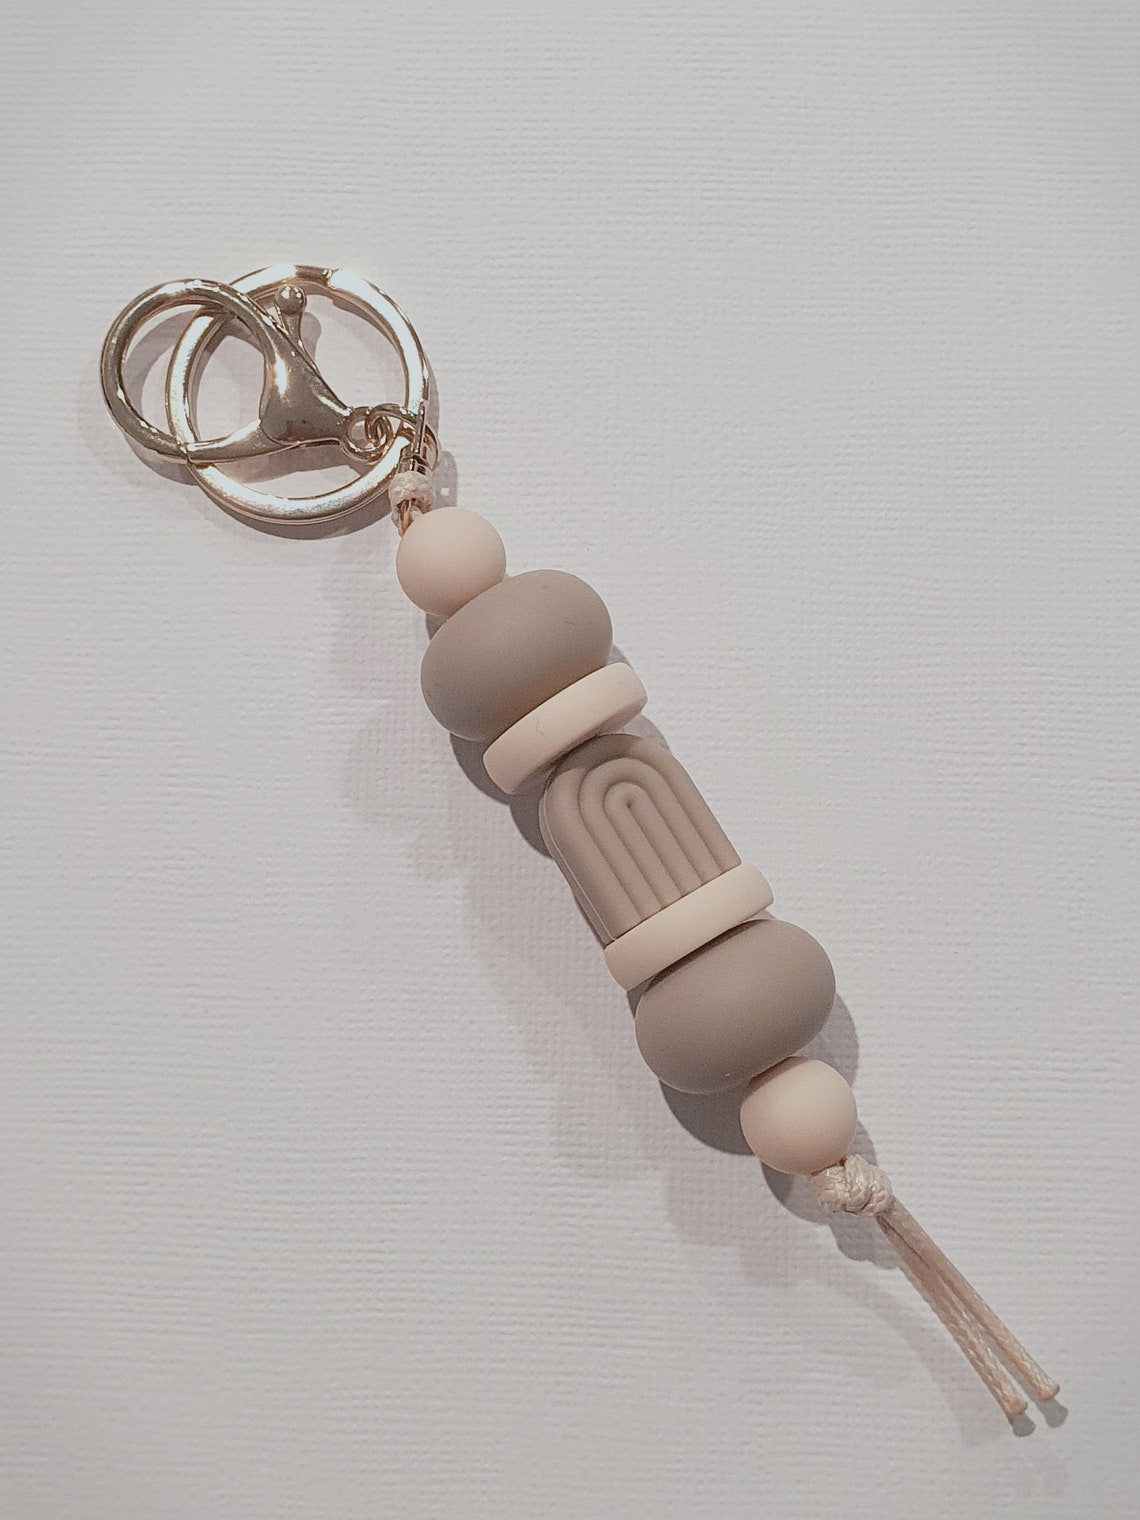 Boho Arch "Cafe" Collection | Handmade Keyring or Lanyard | LIMITED ADDITION